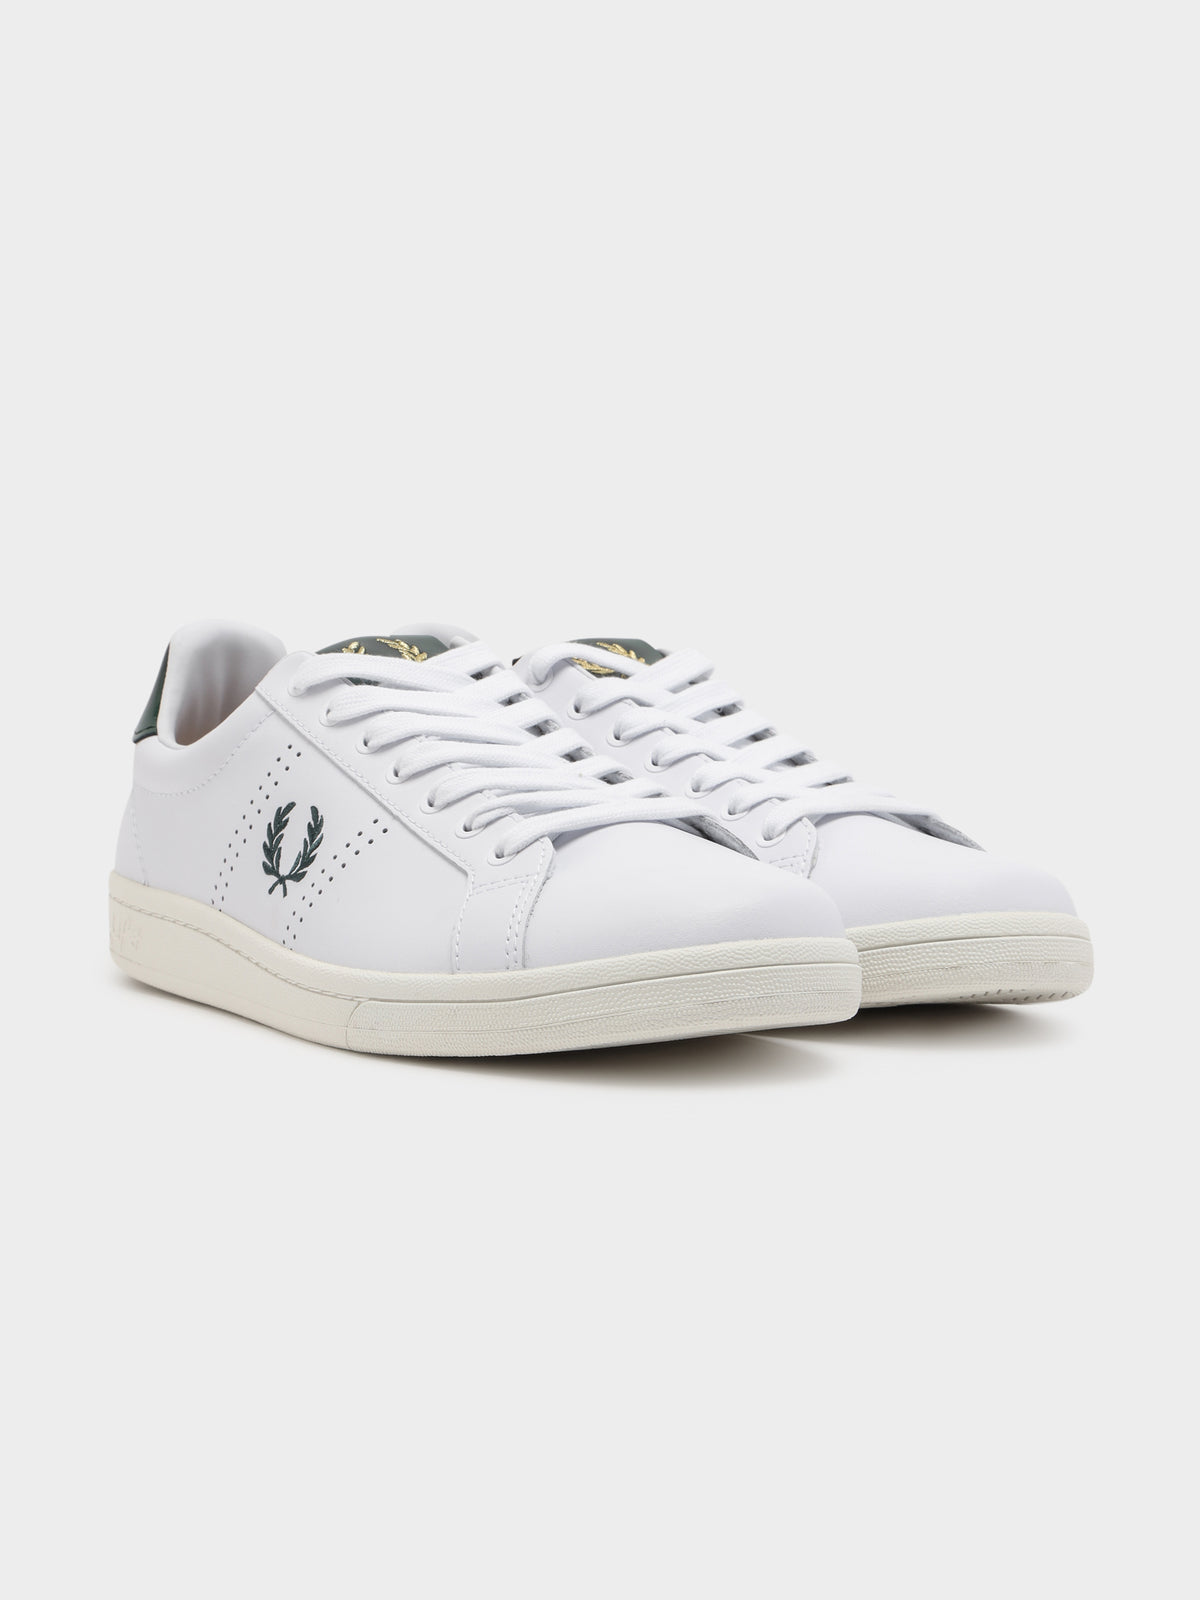 Mens B721 Leather Tab Sneaker in White &amp; Green